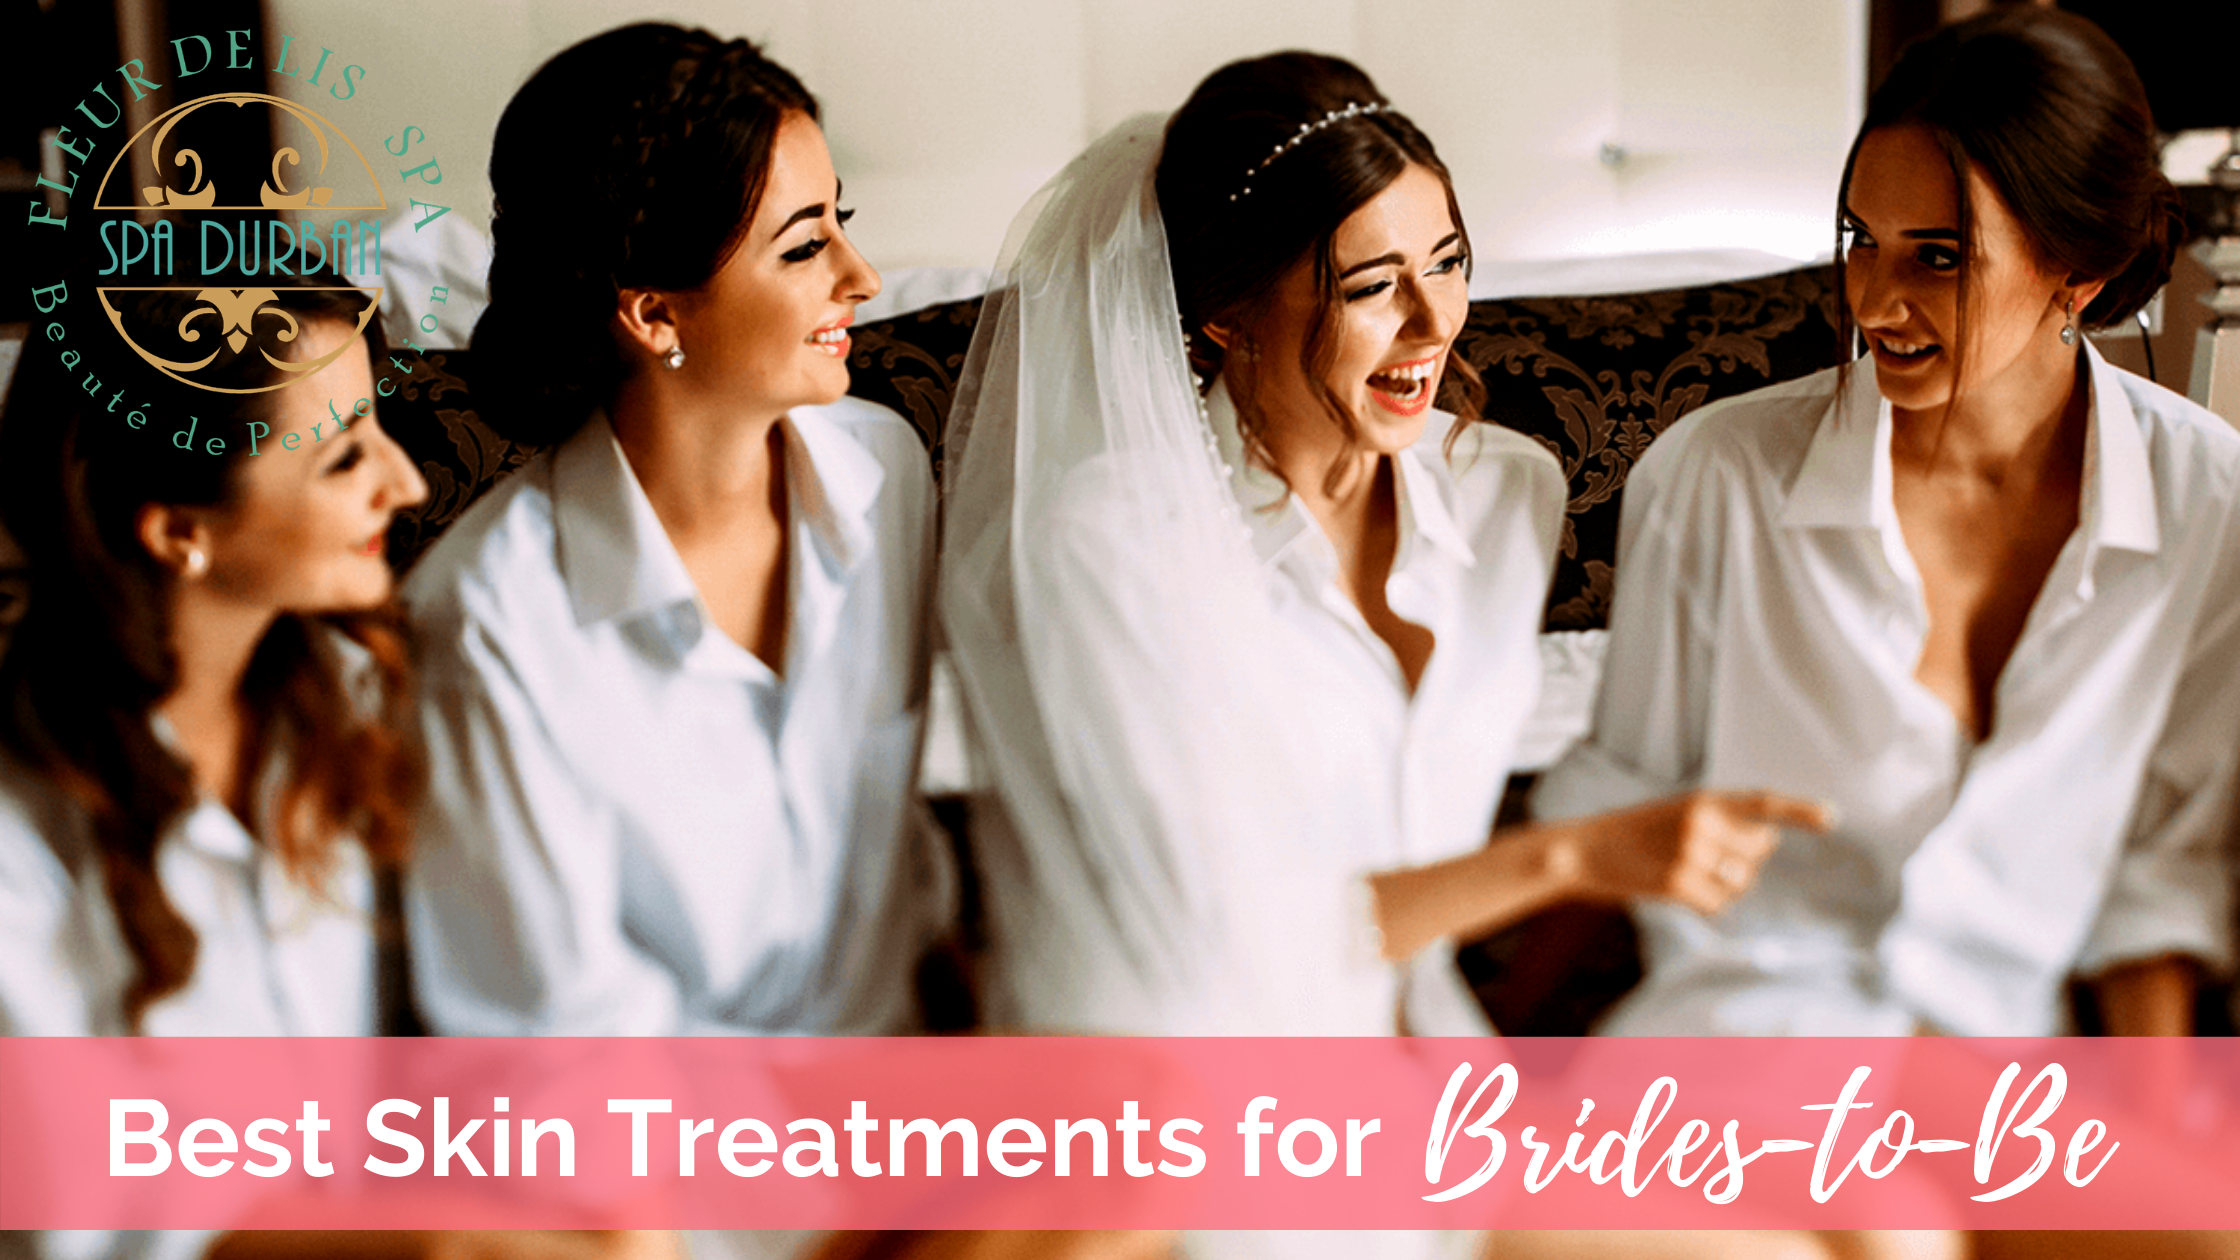 Best Skin Treatments for Brides-to-Be